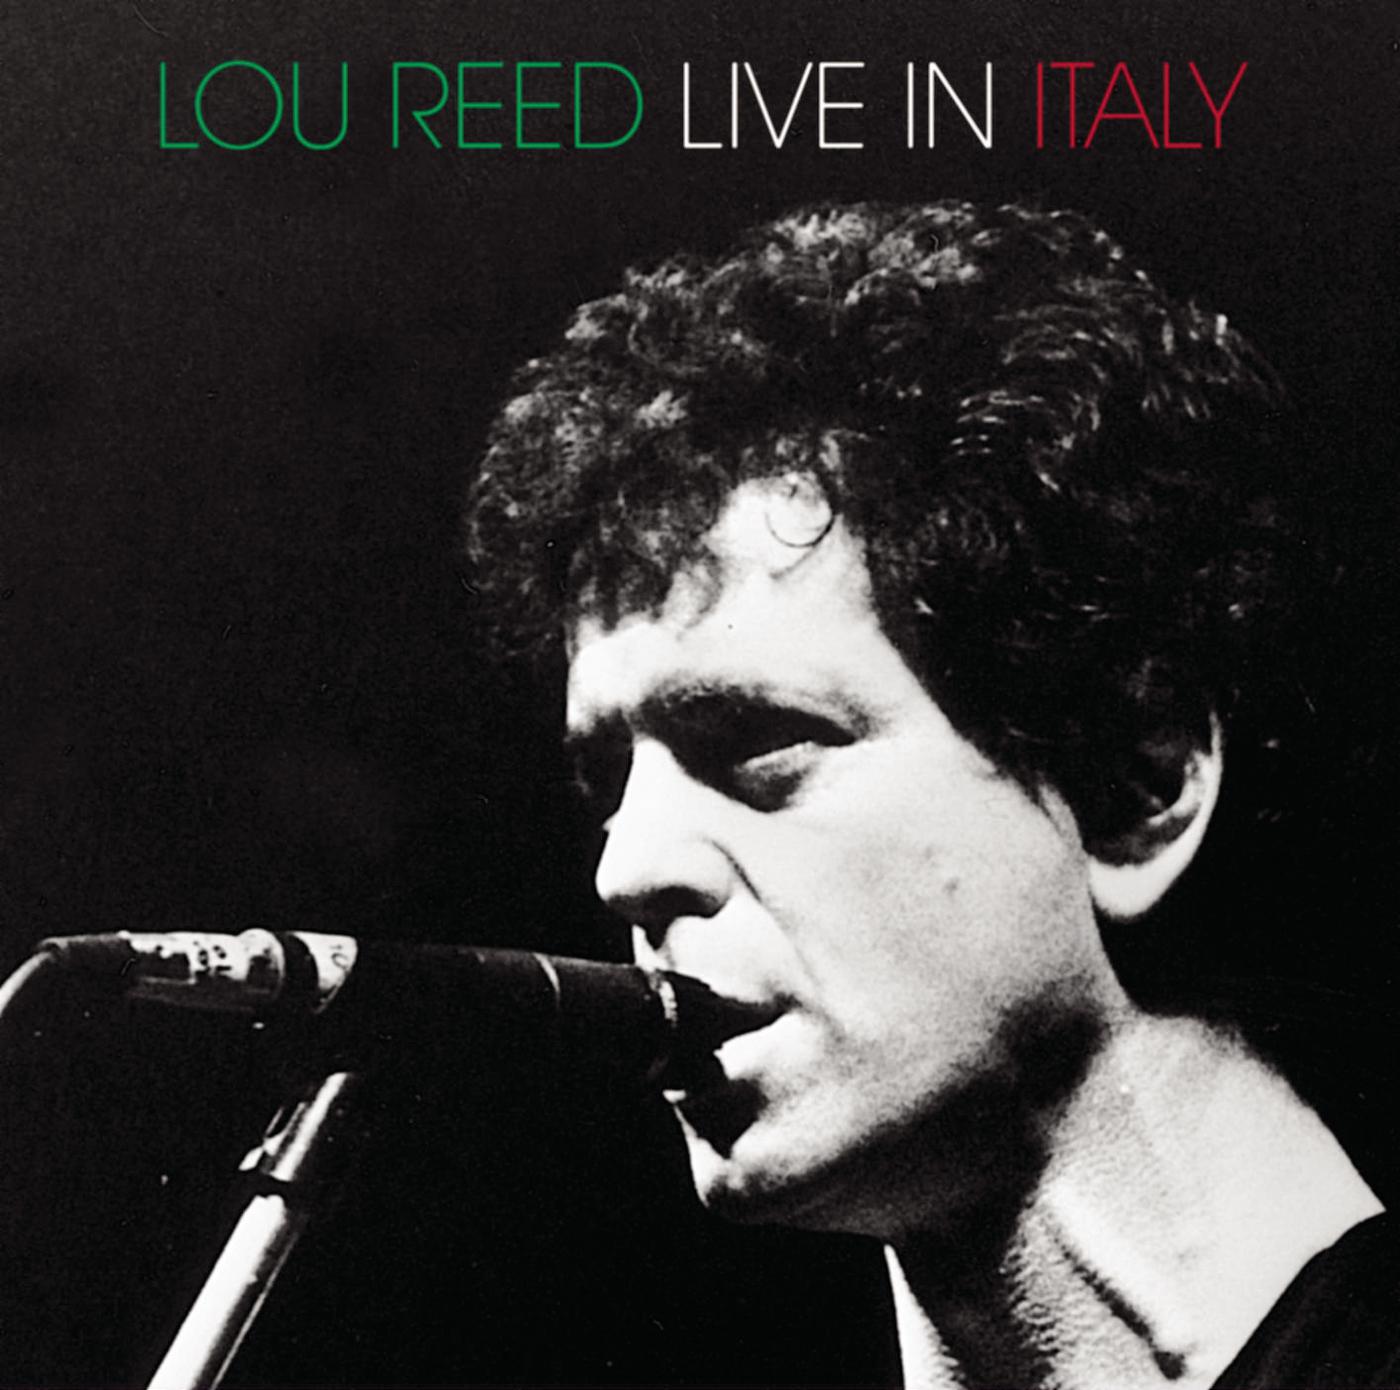 Lou Reed - Rock and Roll (Live)